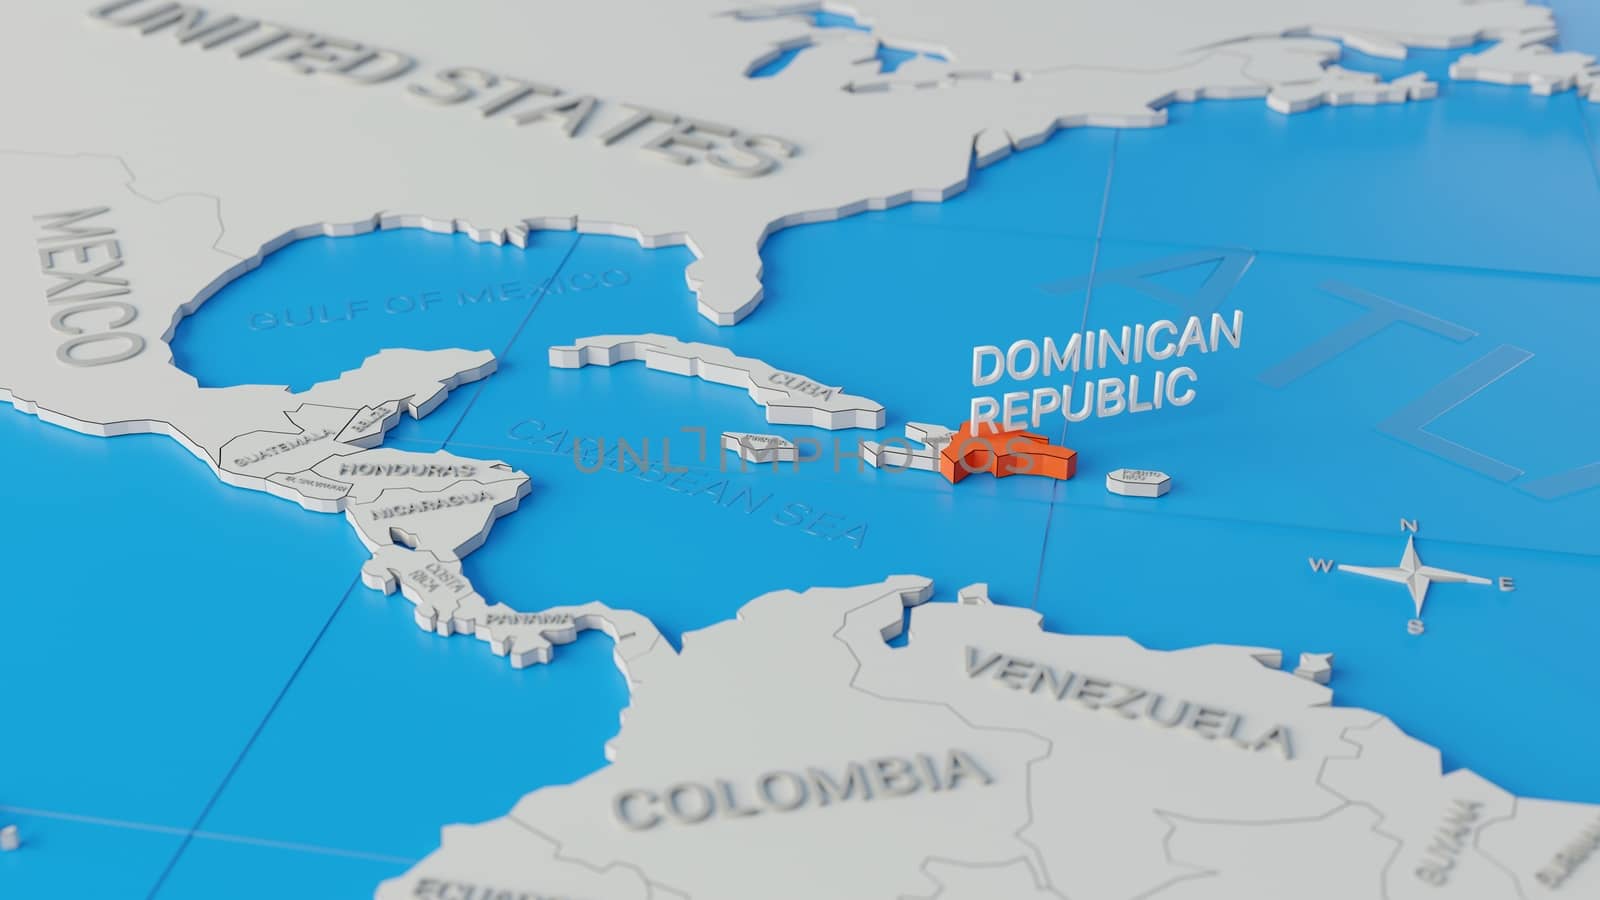 Dominican Republic highlighted on a white simplified 3D world map. Digital 3D render.